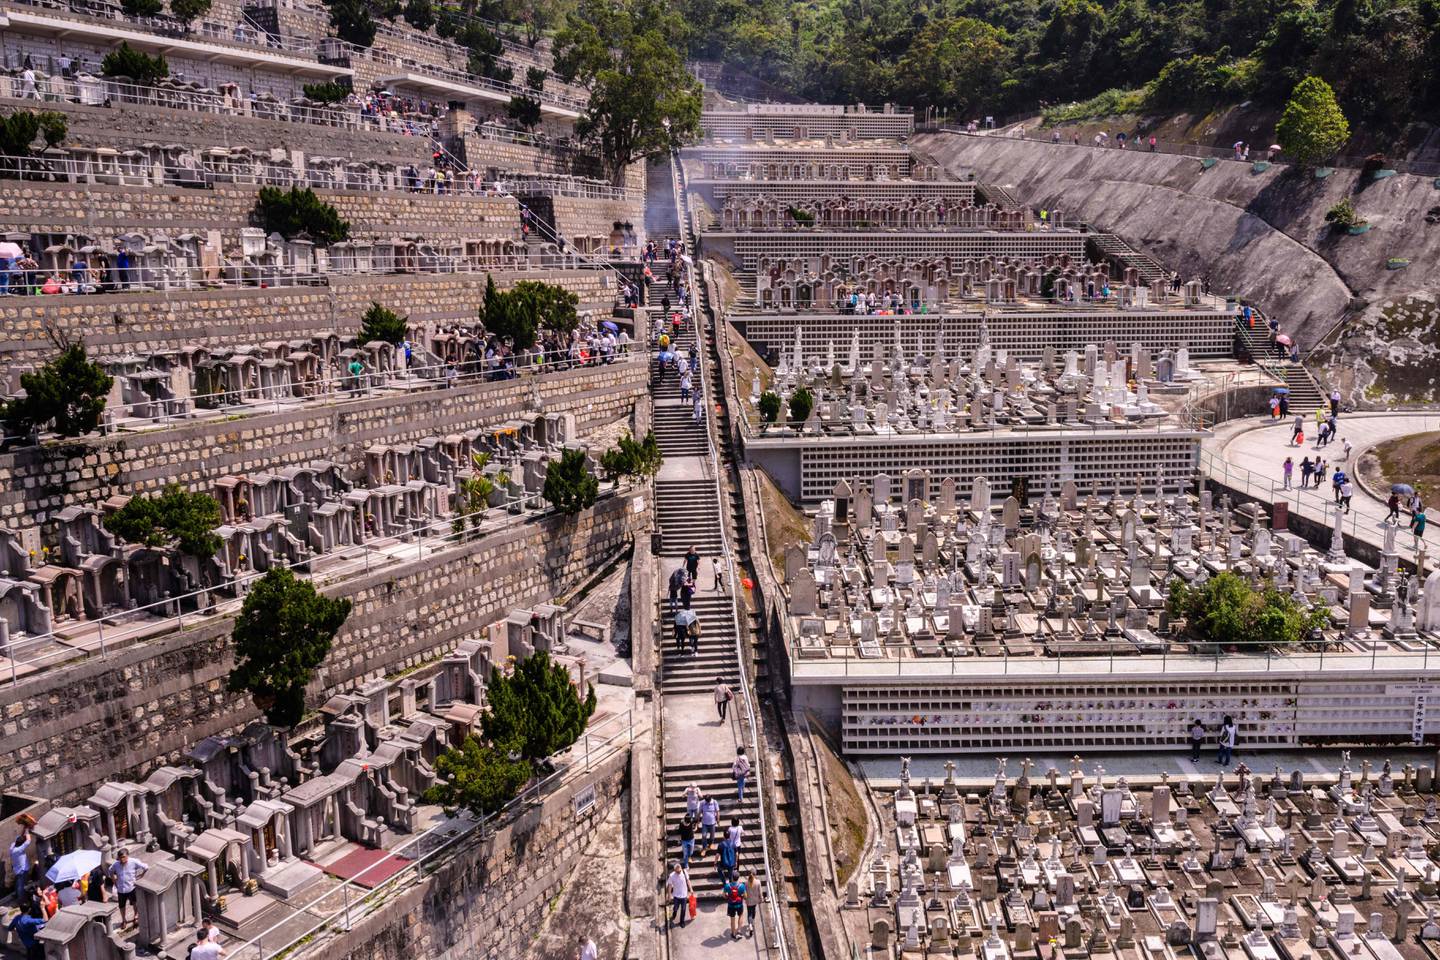 TOPSHOT - People walk through a cemetery during the Ching Ming Festival, or grave-sweeping day, in Hong Kong on April 5, 2019. - Visiting the graves of ancestors during Ching Ming is a Chinese tradition dating back 2000 years to the Han dynasty with families paying their respects by cleaning their graves, presenting offerings of food and burning joss paper. (Photo by Anthony WALLACE / AFP)